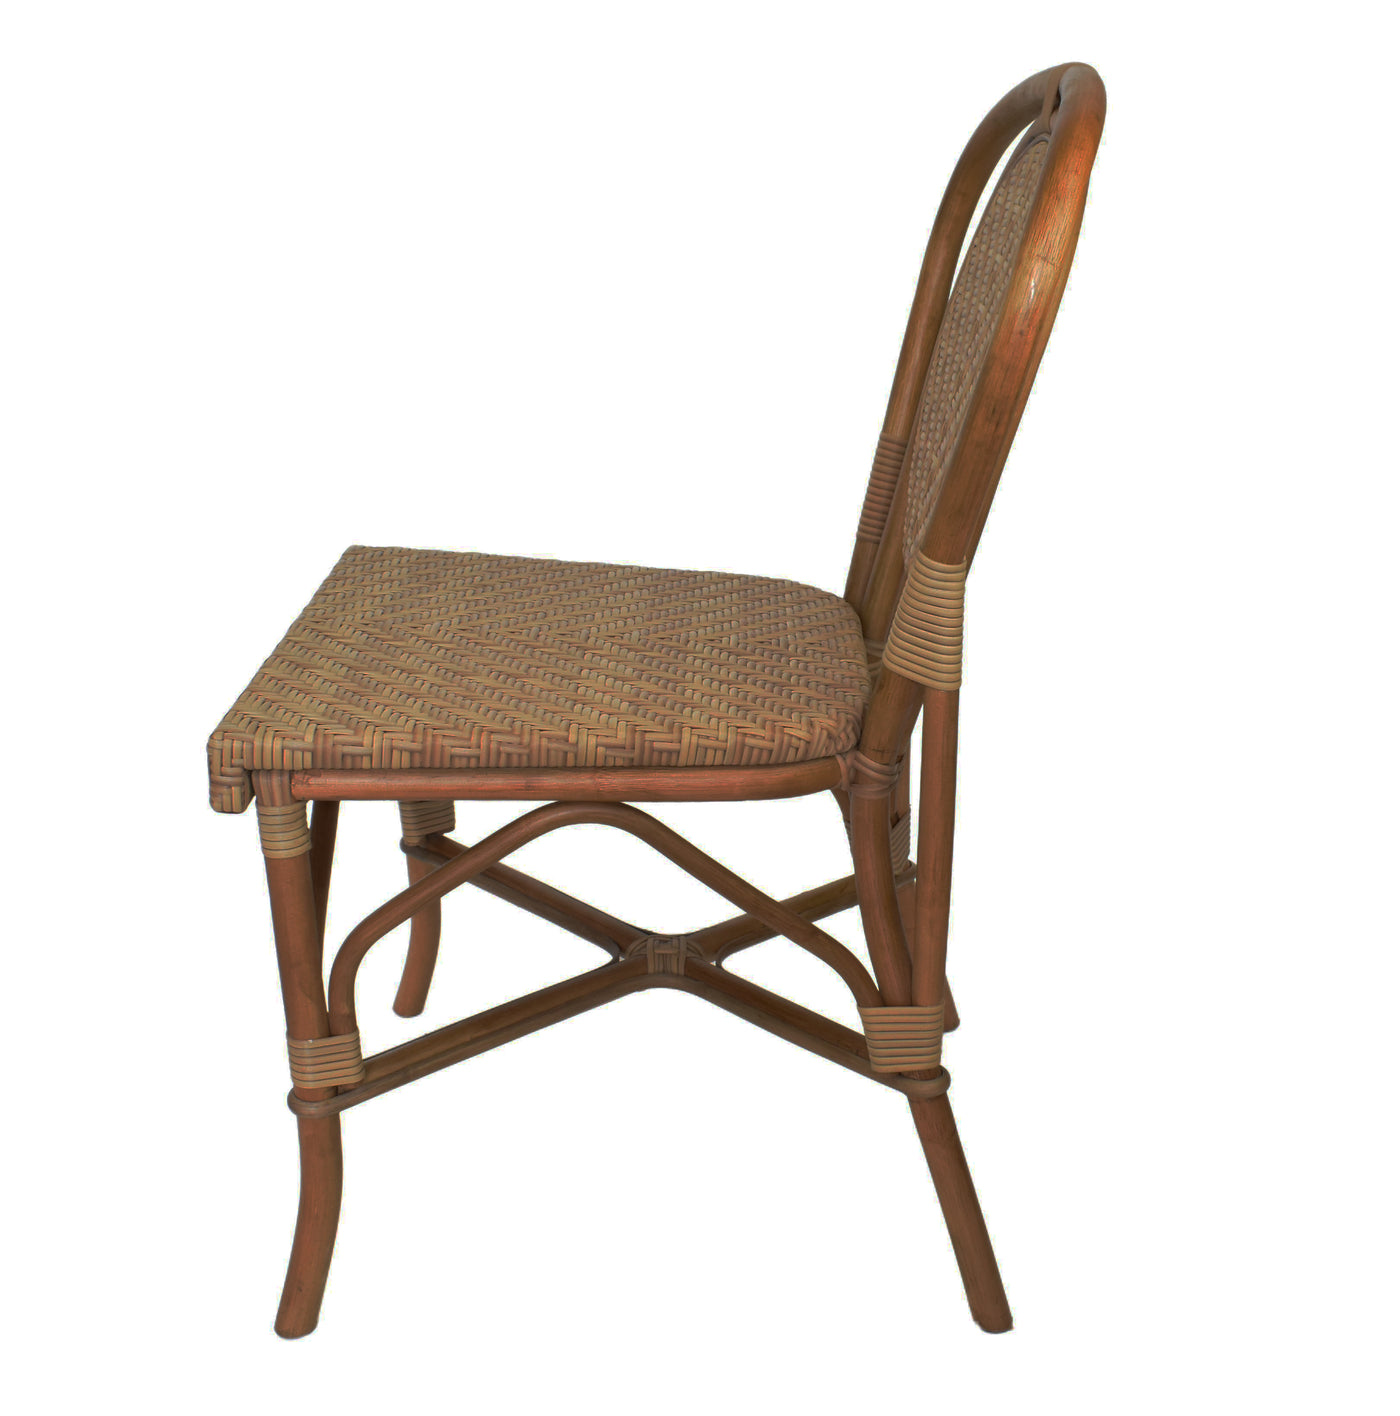 Colonial Rattan Dining Chair